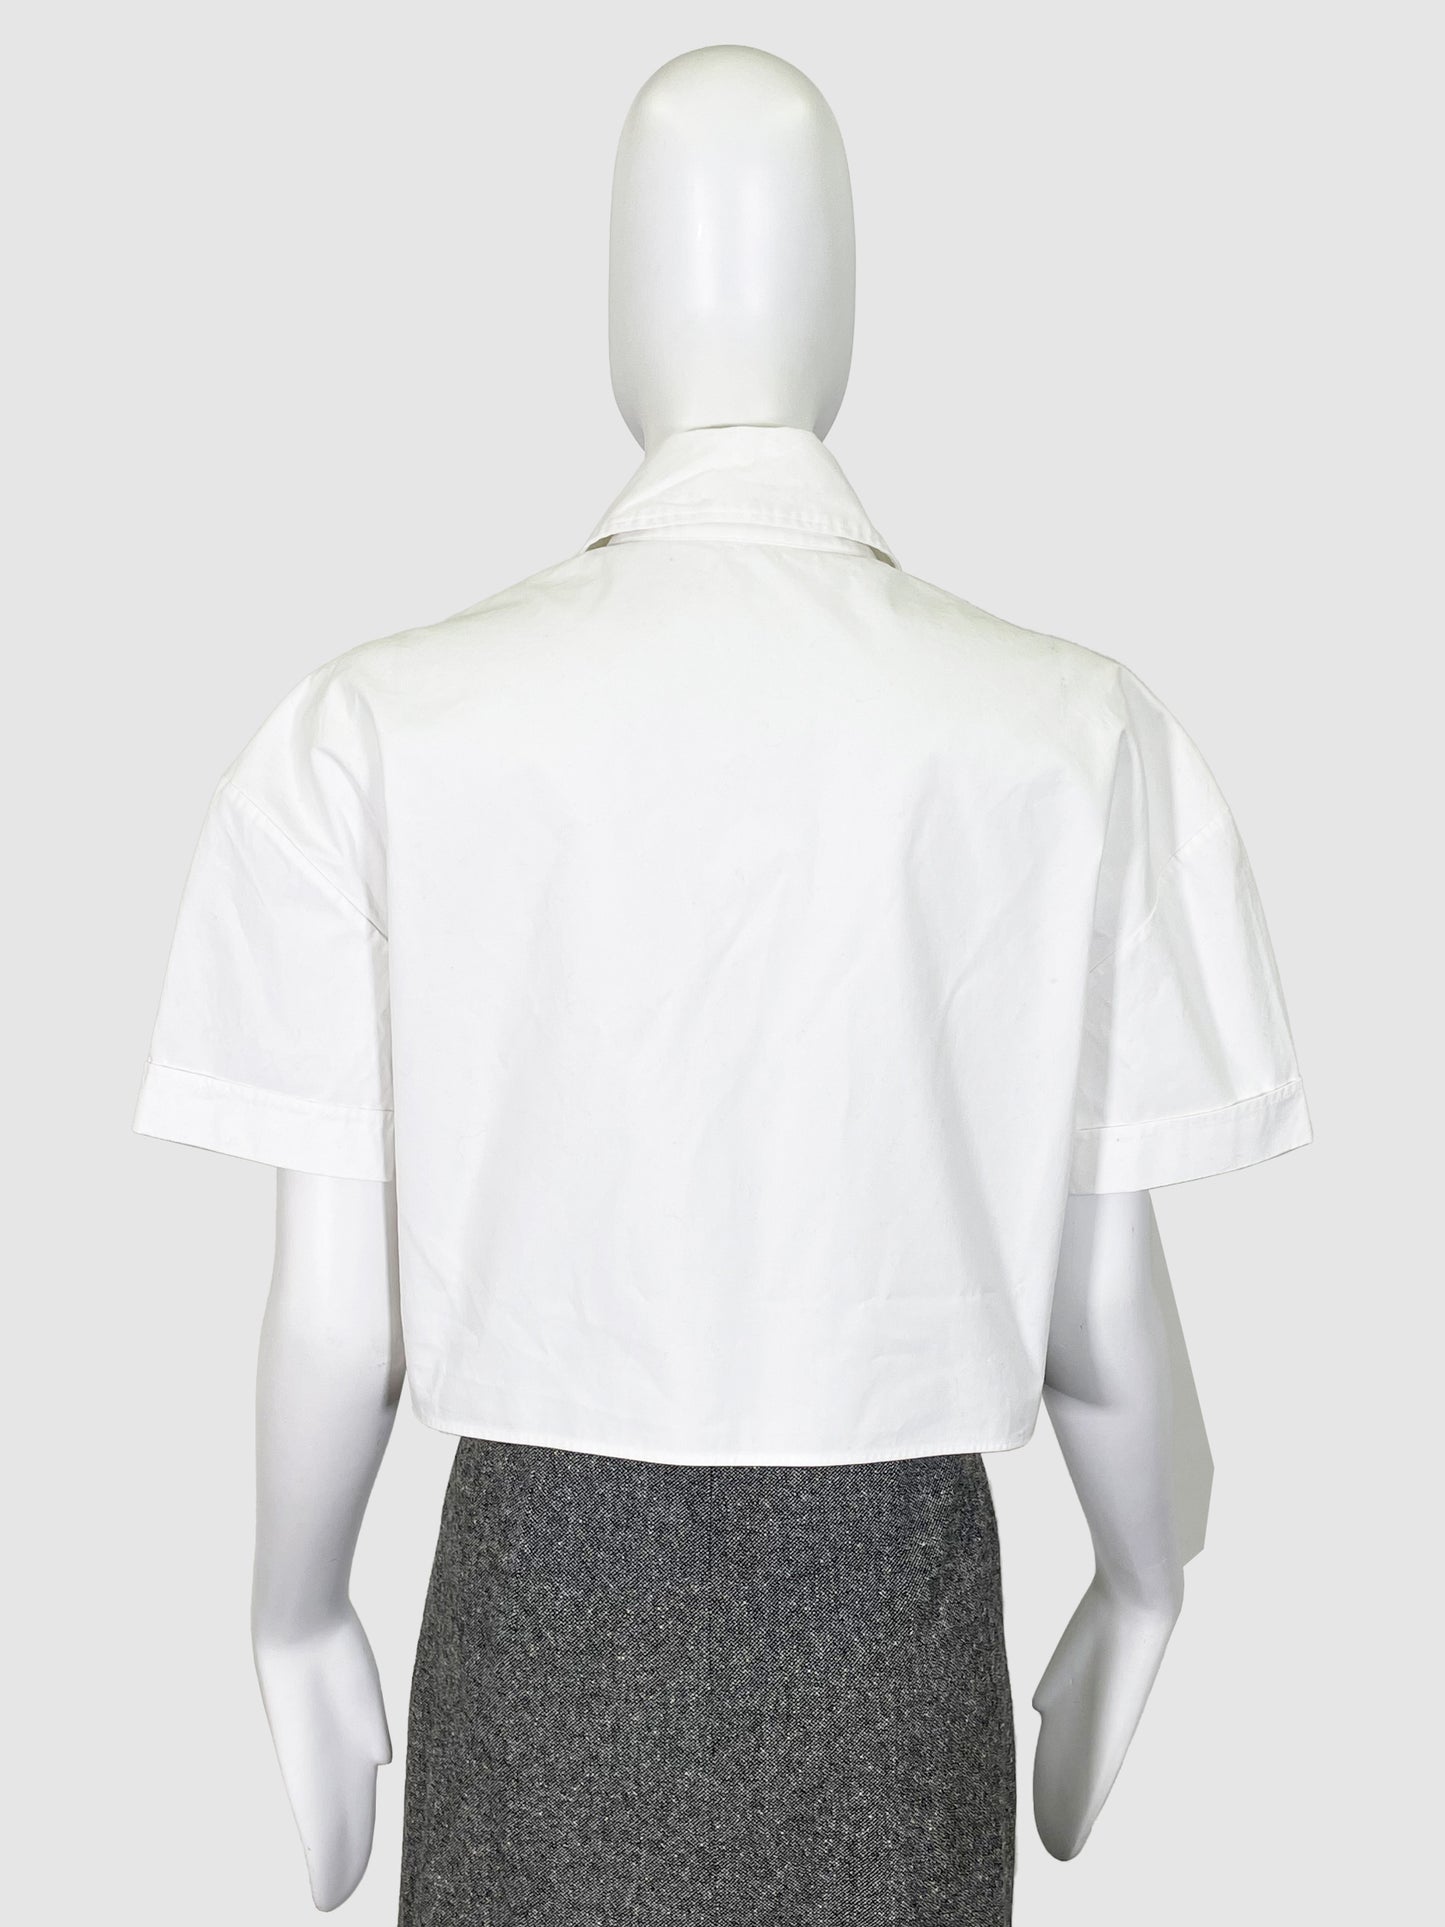 Hugo Boss White Crop Button-Up Blouse - Size 36